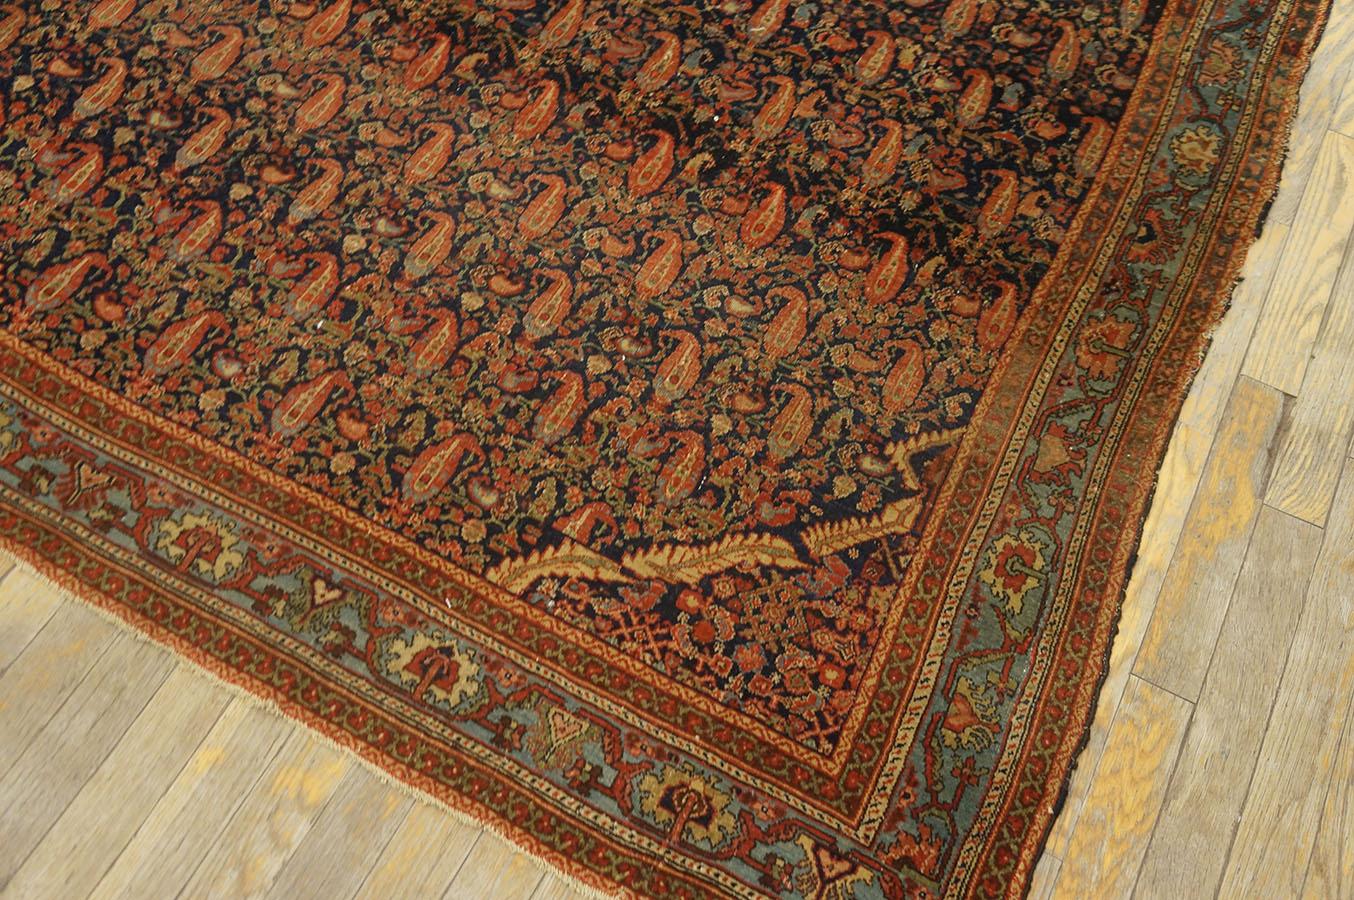 Hand-Knotted Late 19th Century Persian Malayer Carpet ( 5' x 6' 2'' - 152 x 188 cm ) For Sale